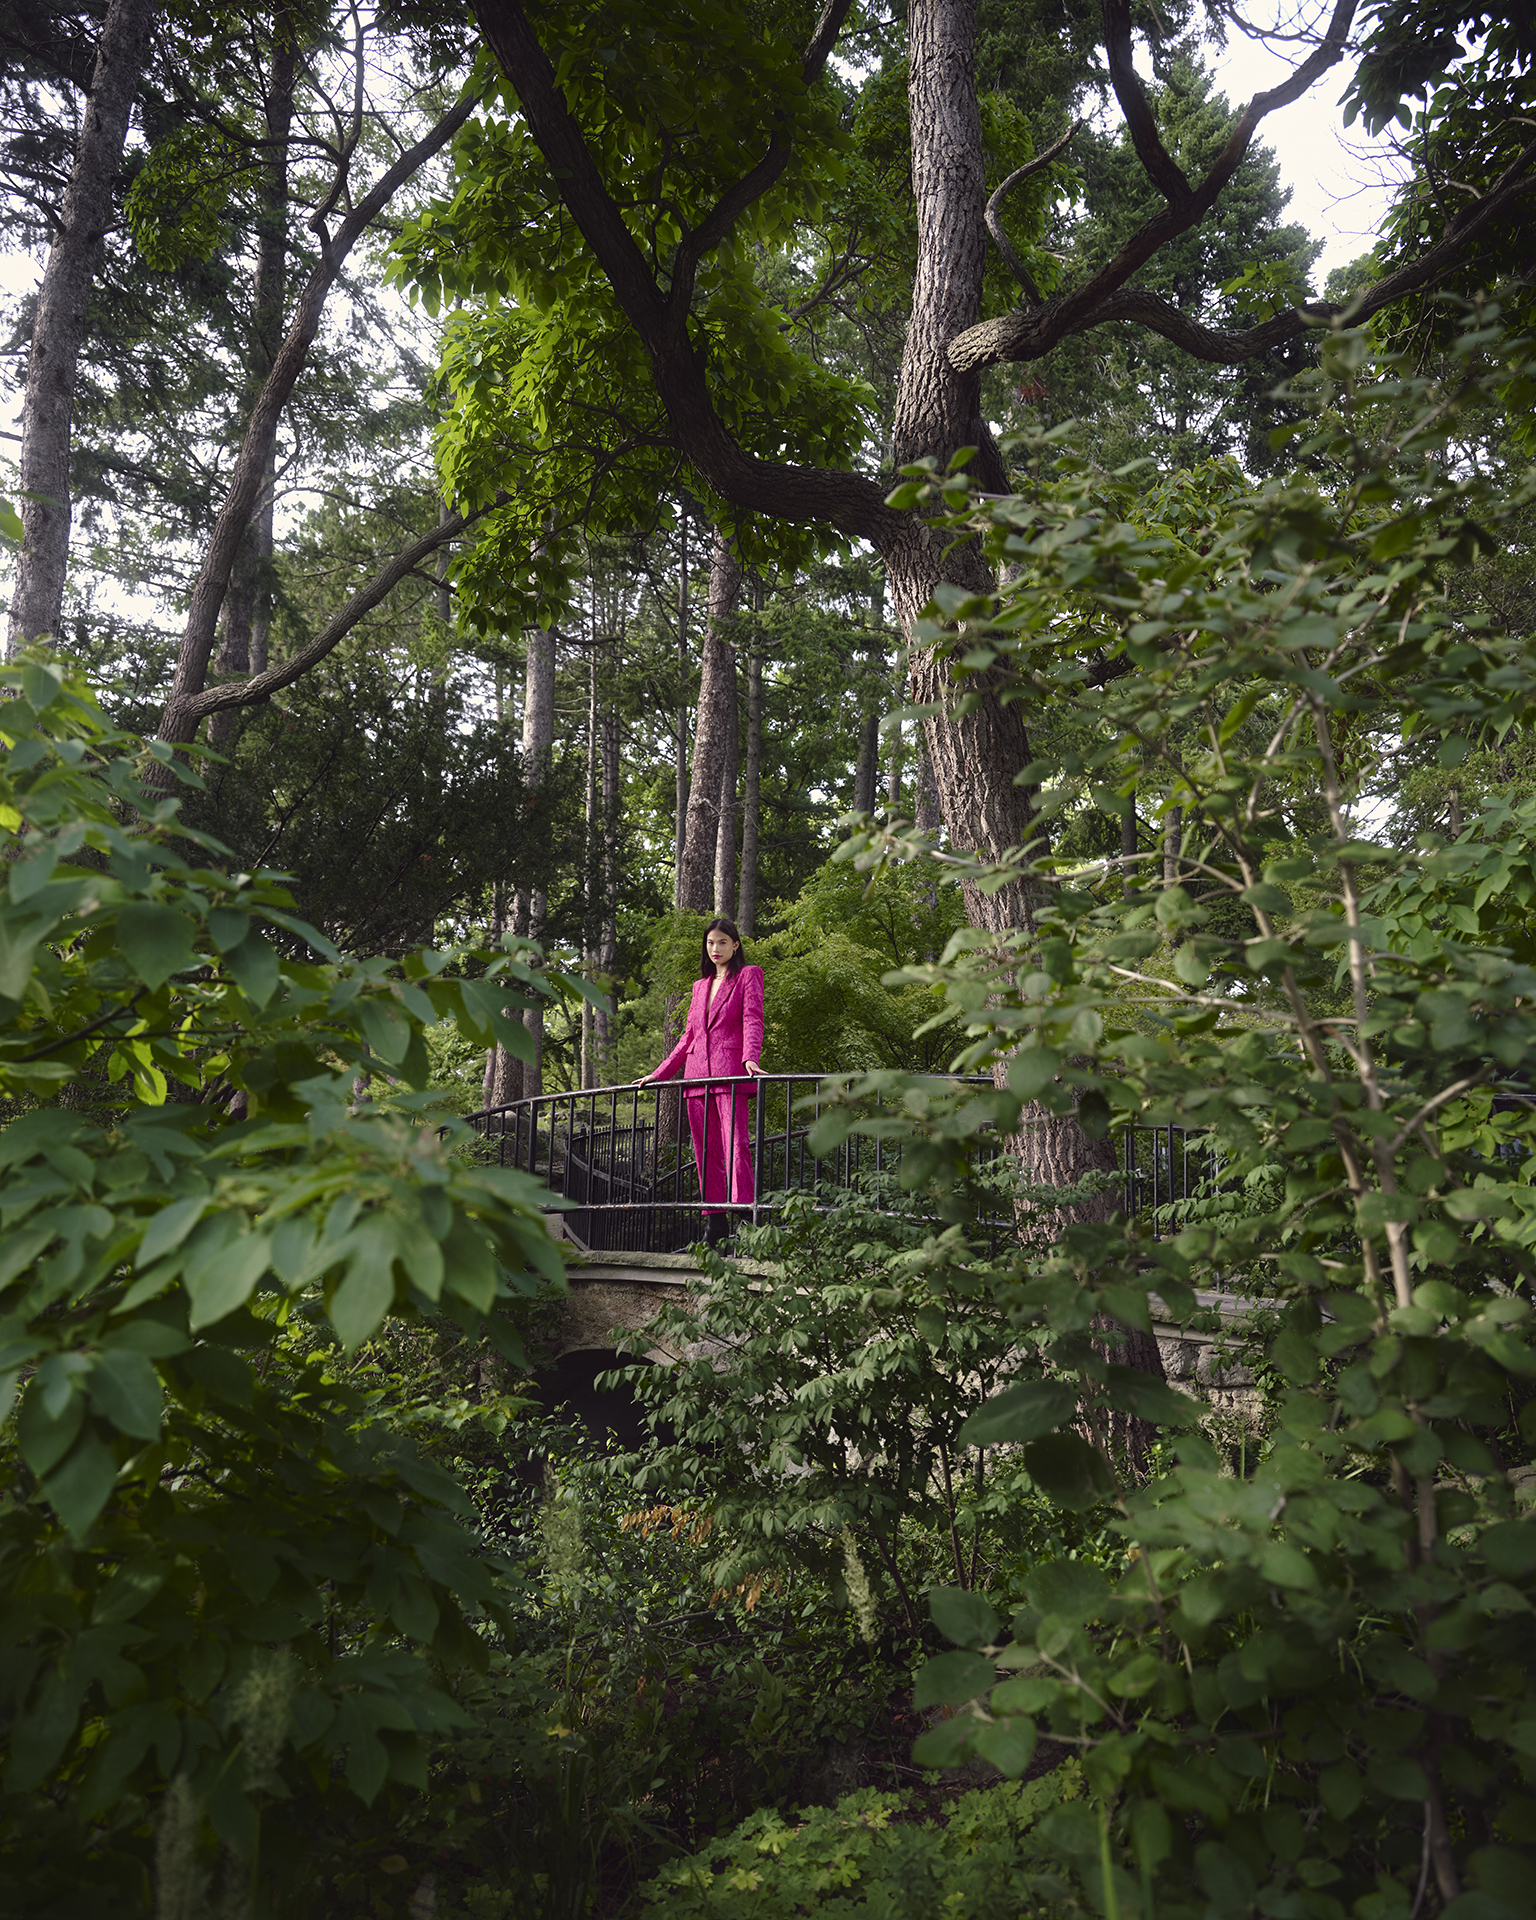 In this image, the female subject is wearing a pink suit in the center of the image. She is surrounded by foliage and greenery. The trees and plants are creating a spiral-esque shape that focusses into the female model.